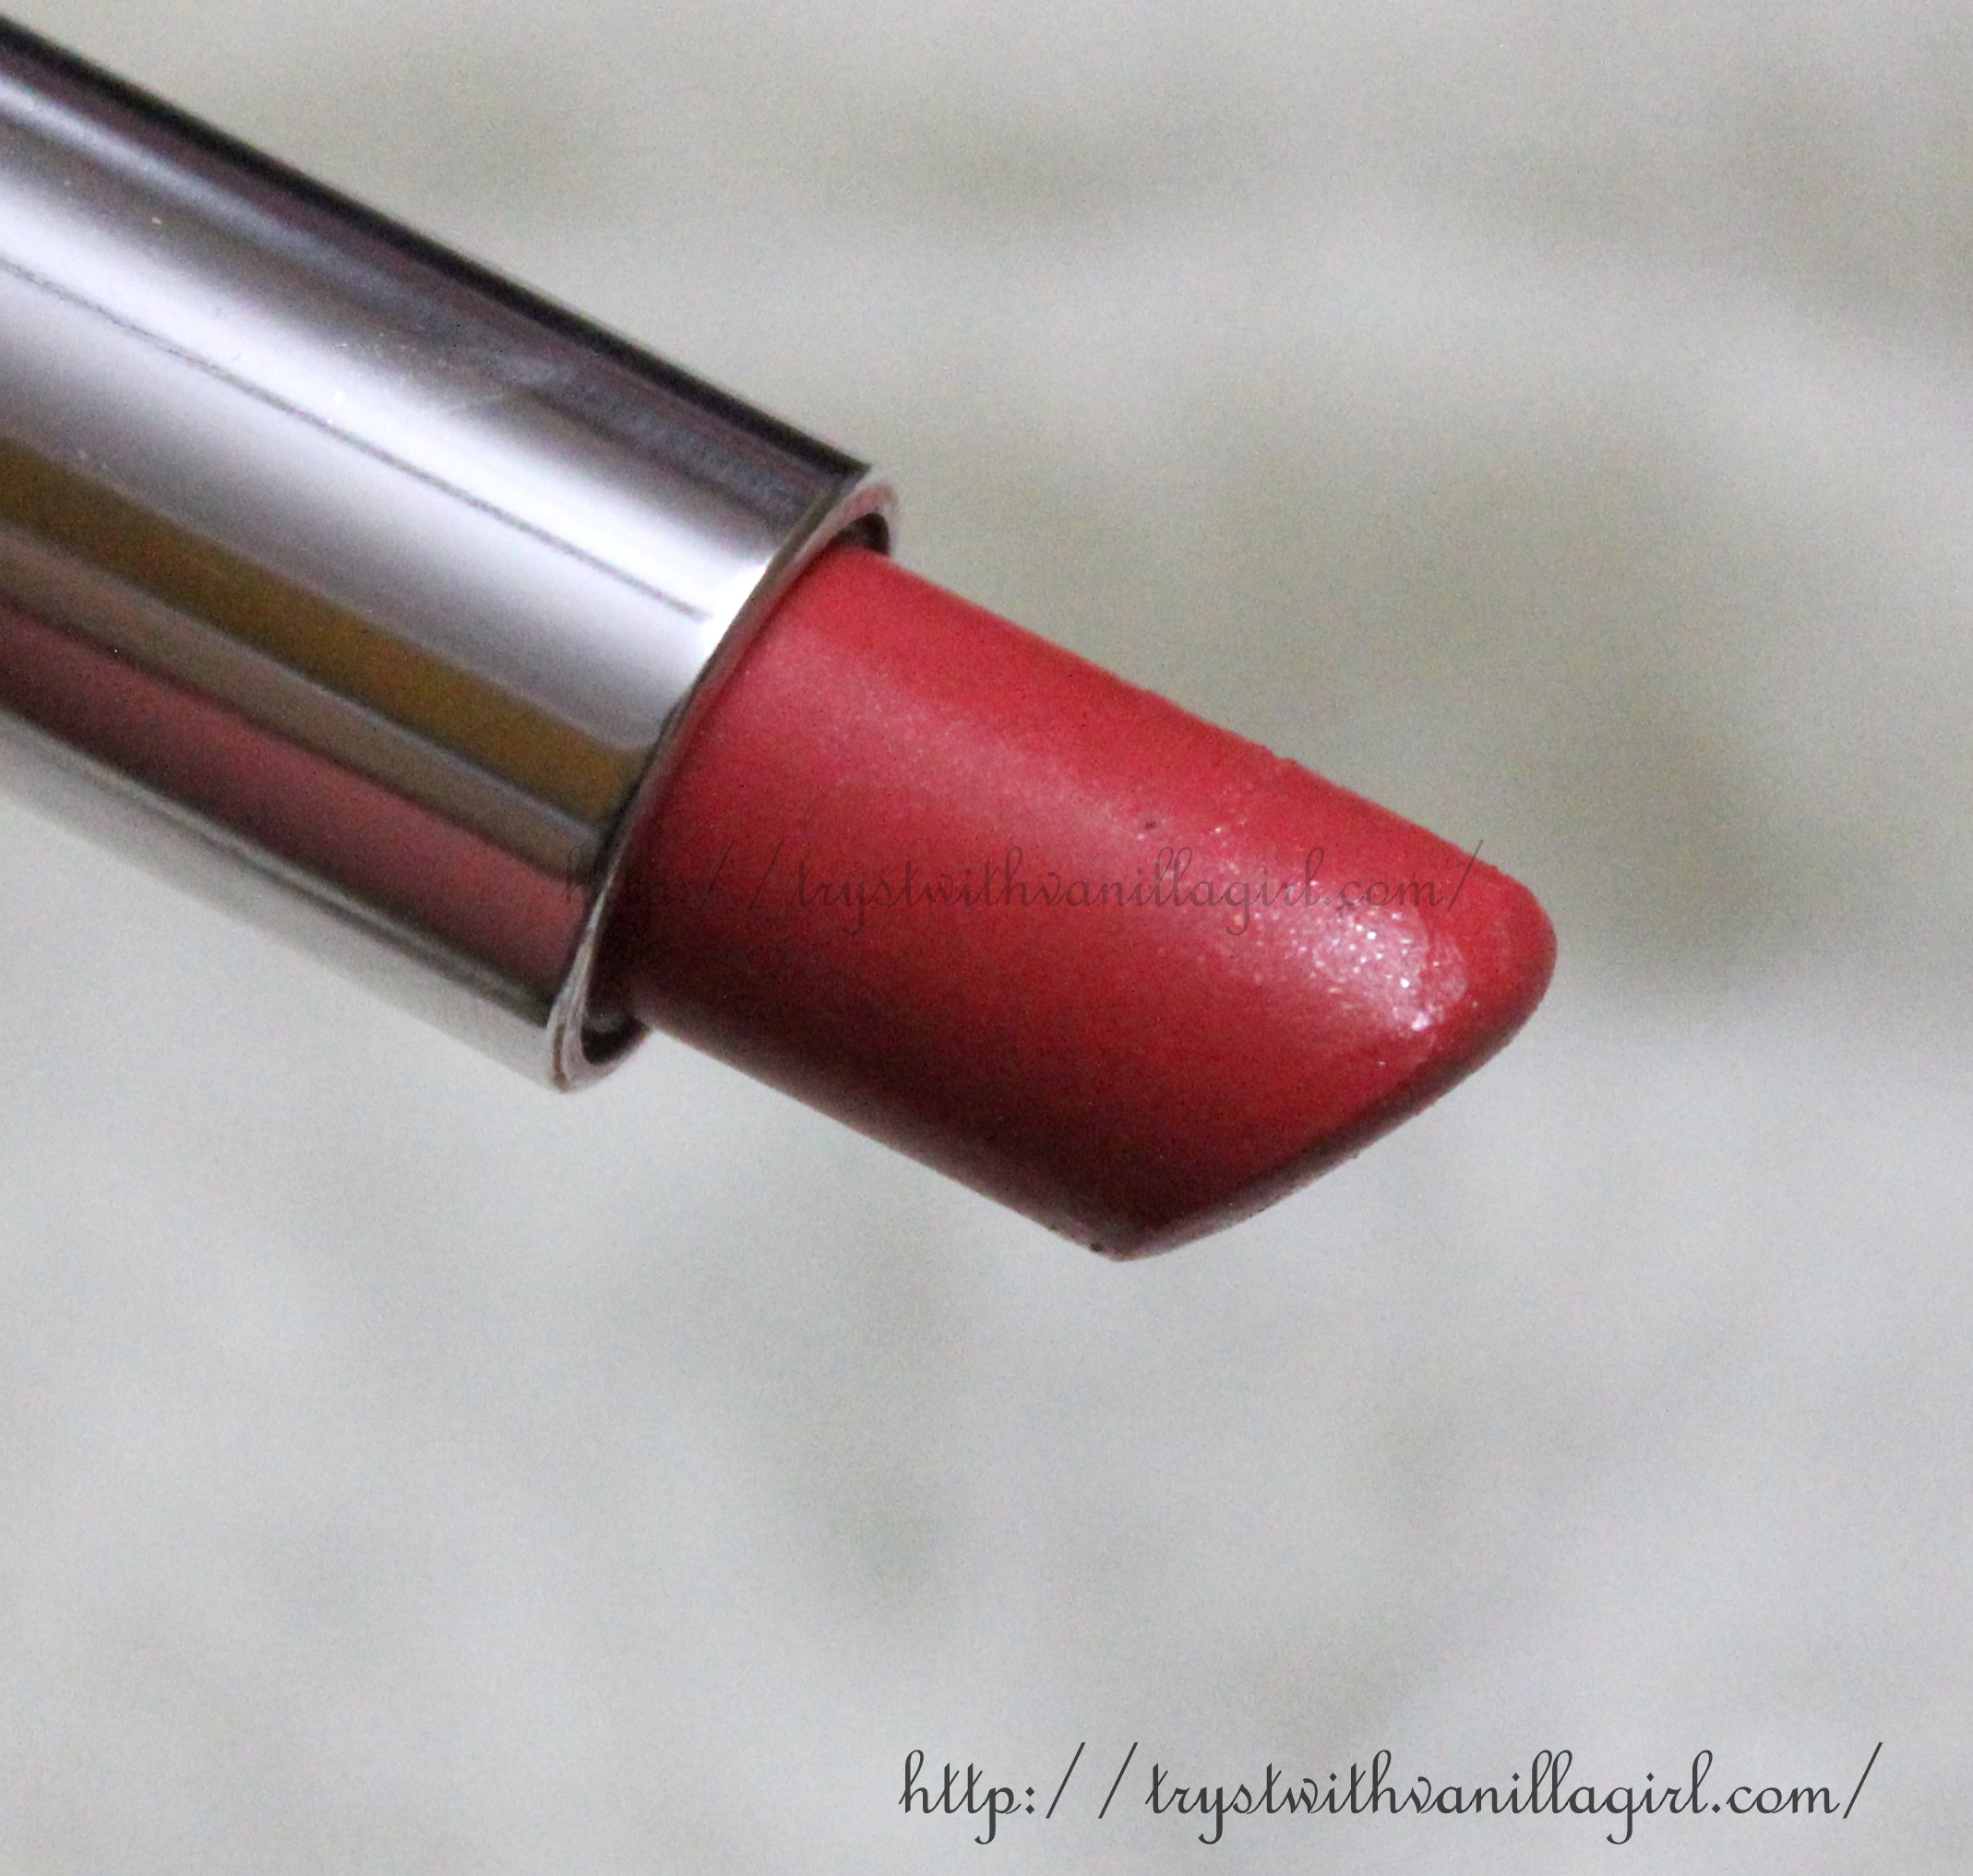 Maybelline Colorsensational High Shine Lipstick Coral Lustre Review